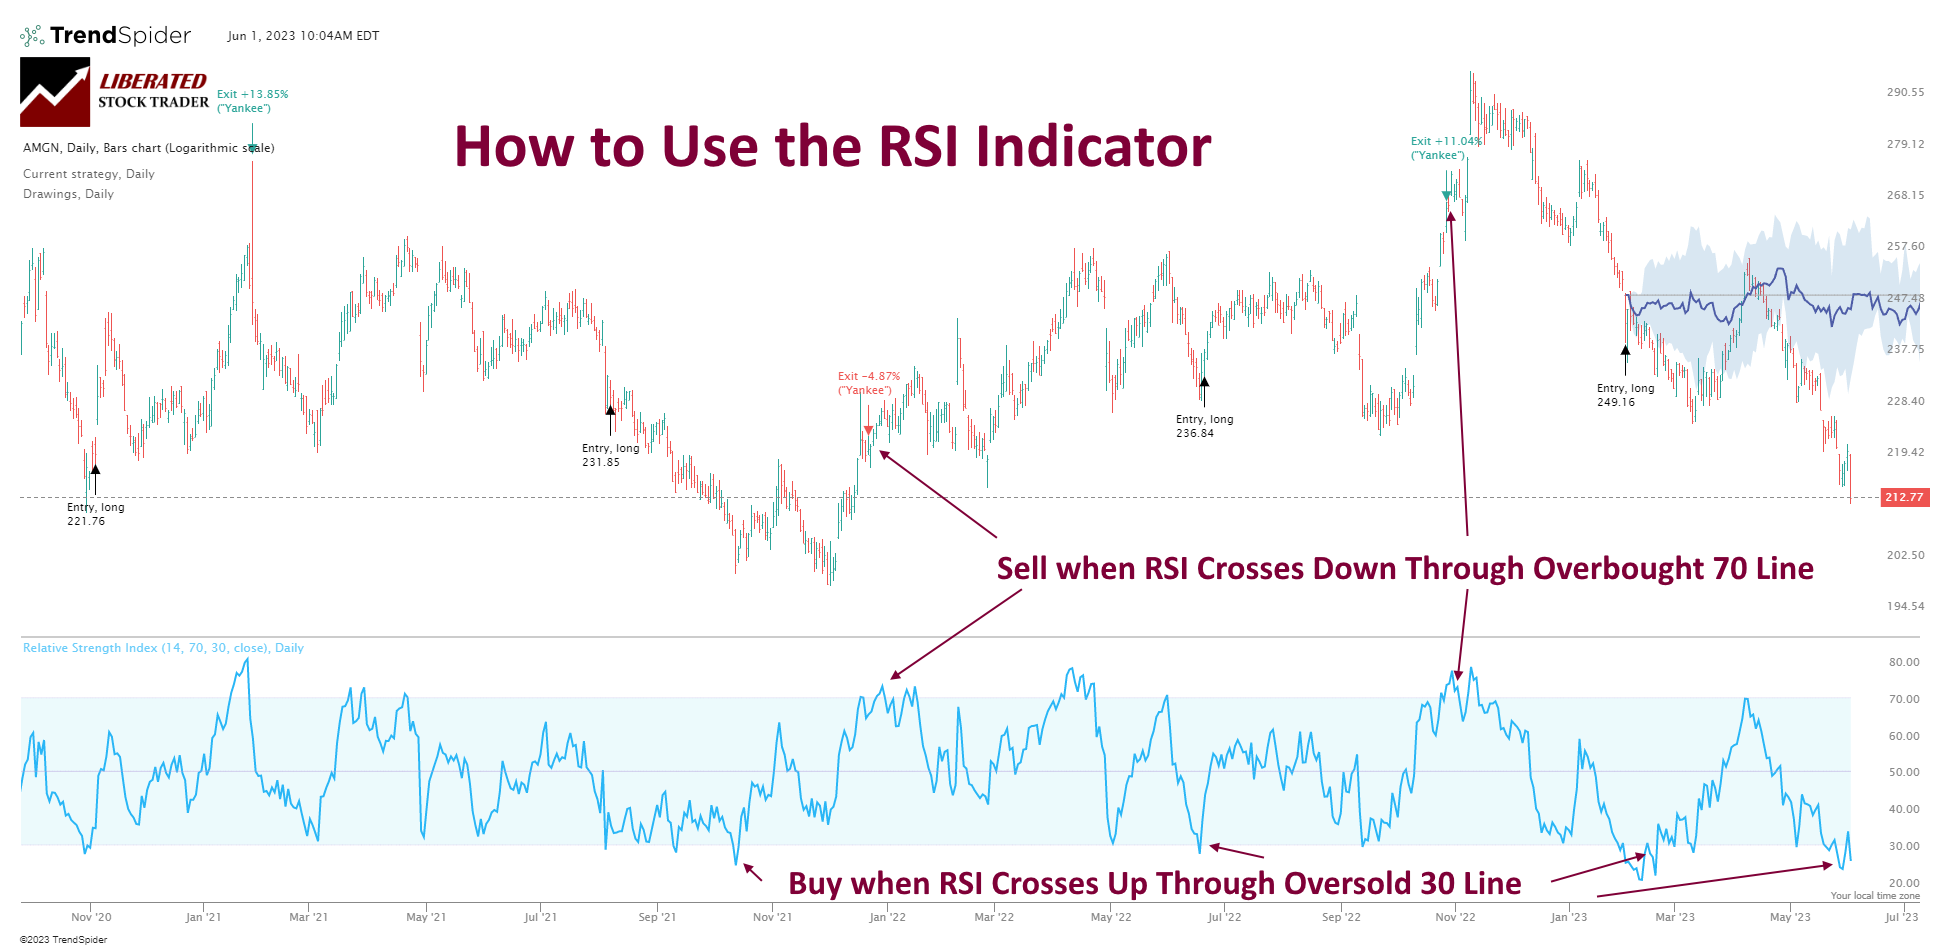 Overbought and Oversold Conditions: How to use RSI indicators to trade and make buy and sell decisions.